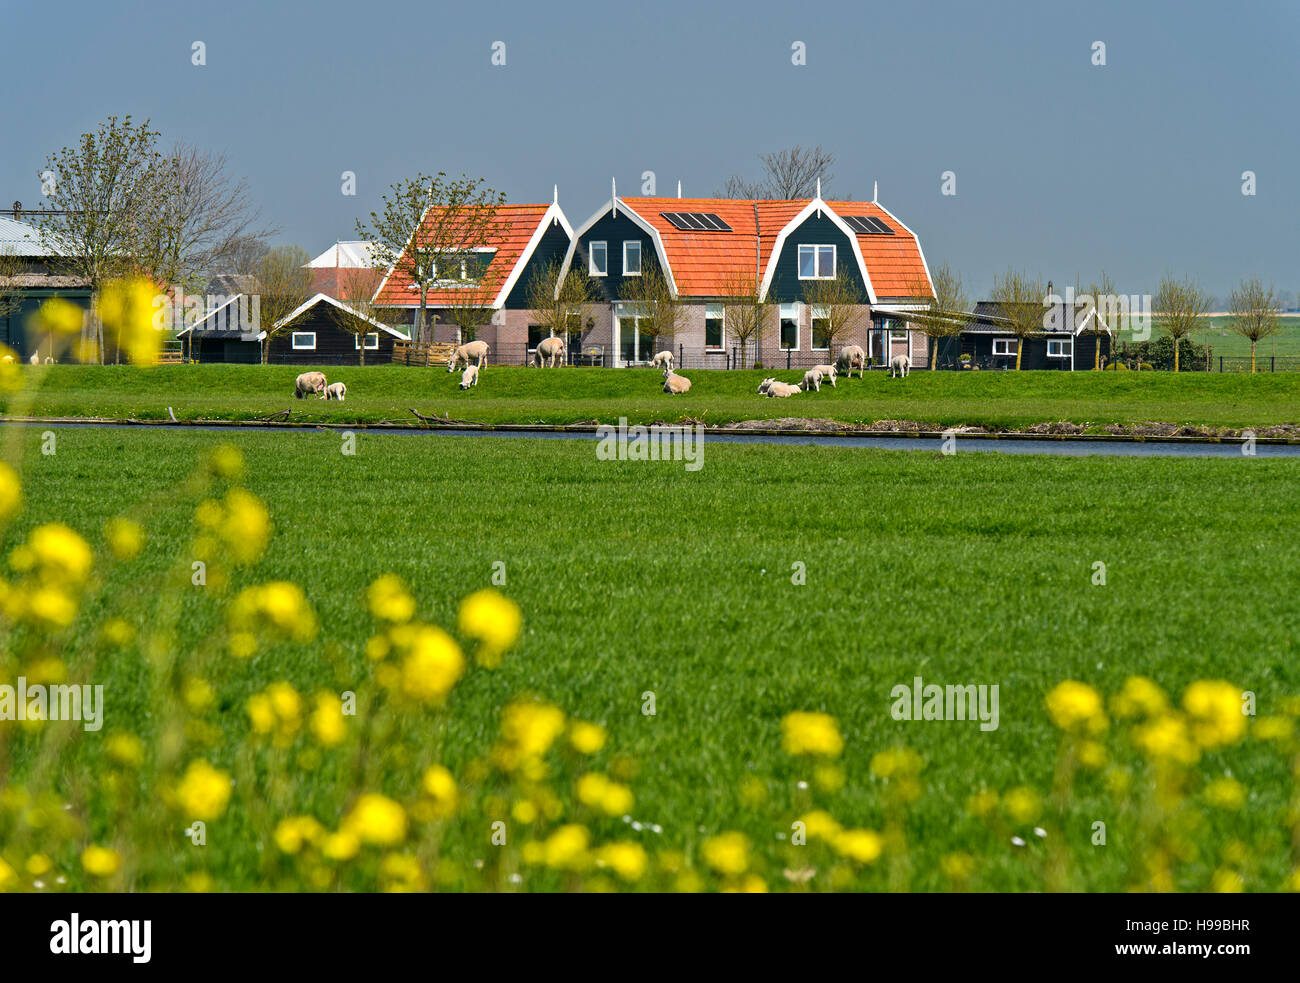 Farm house in the marshland, Beemster, Waterland Region, North Holland, Netherlands Stock Photo